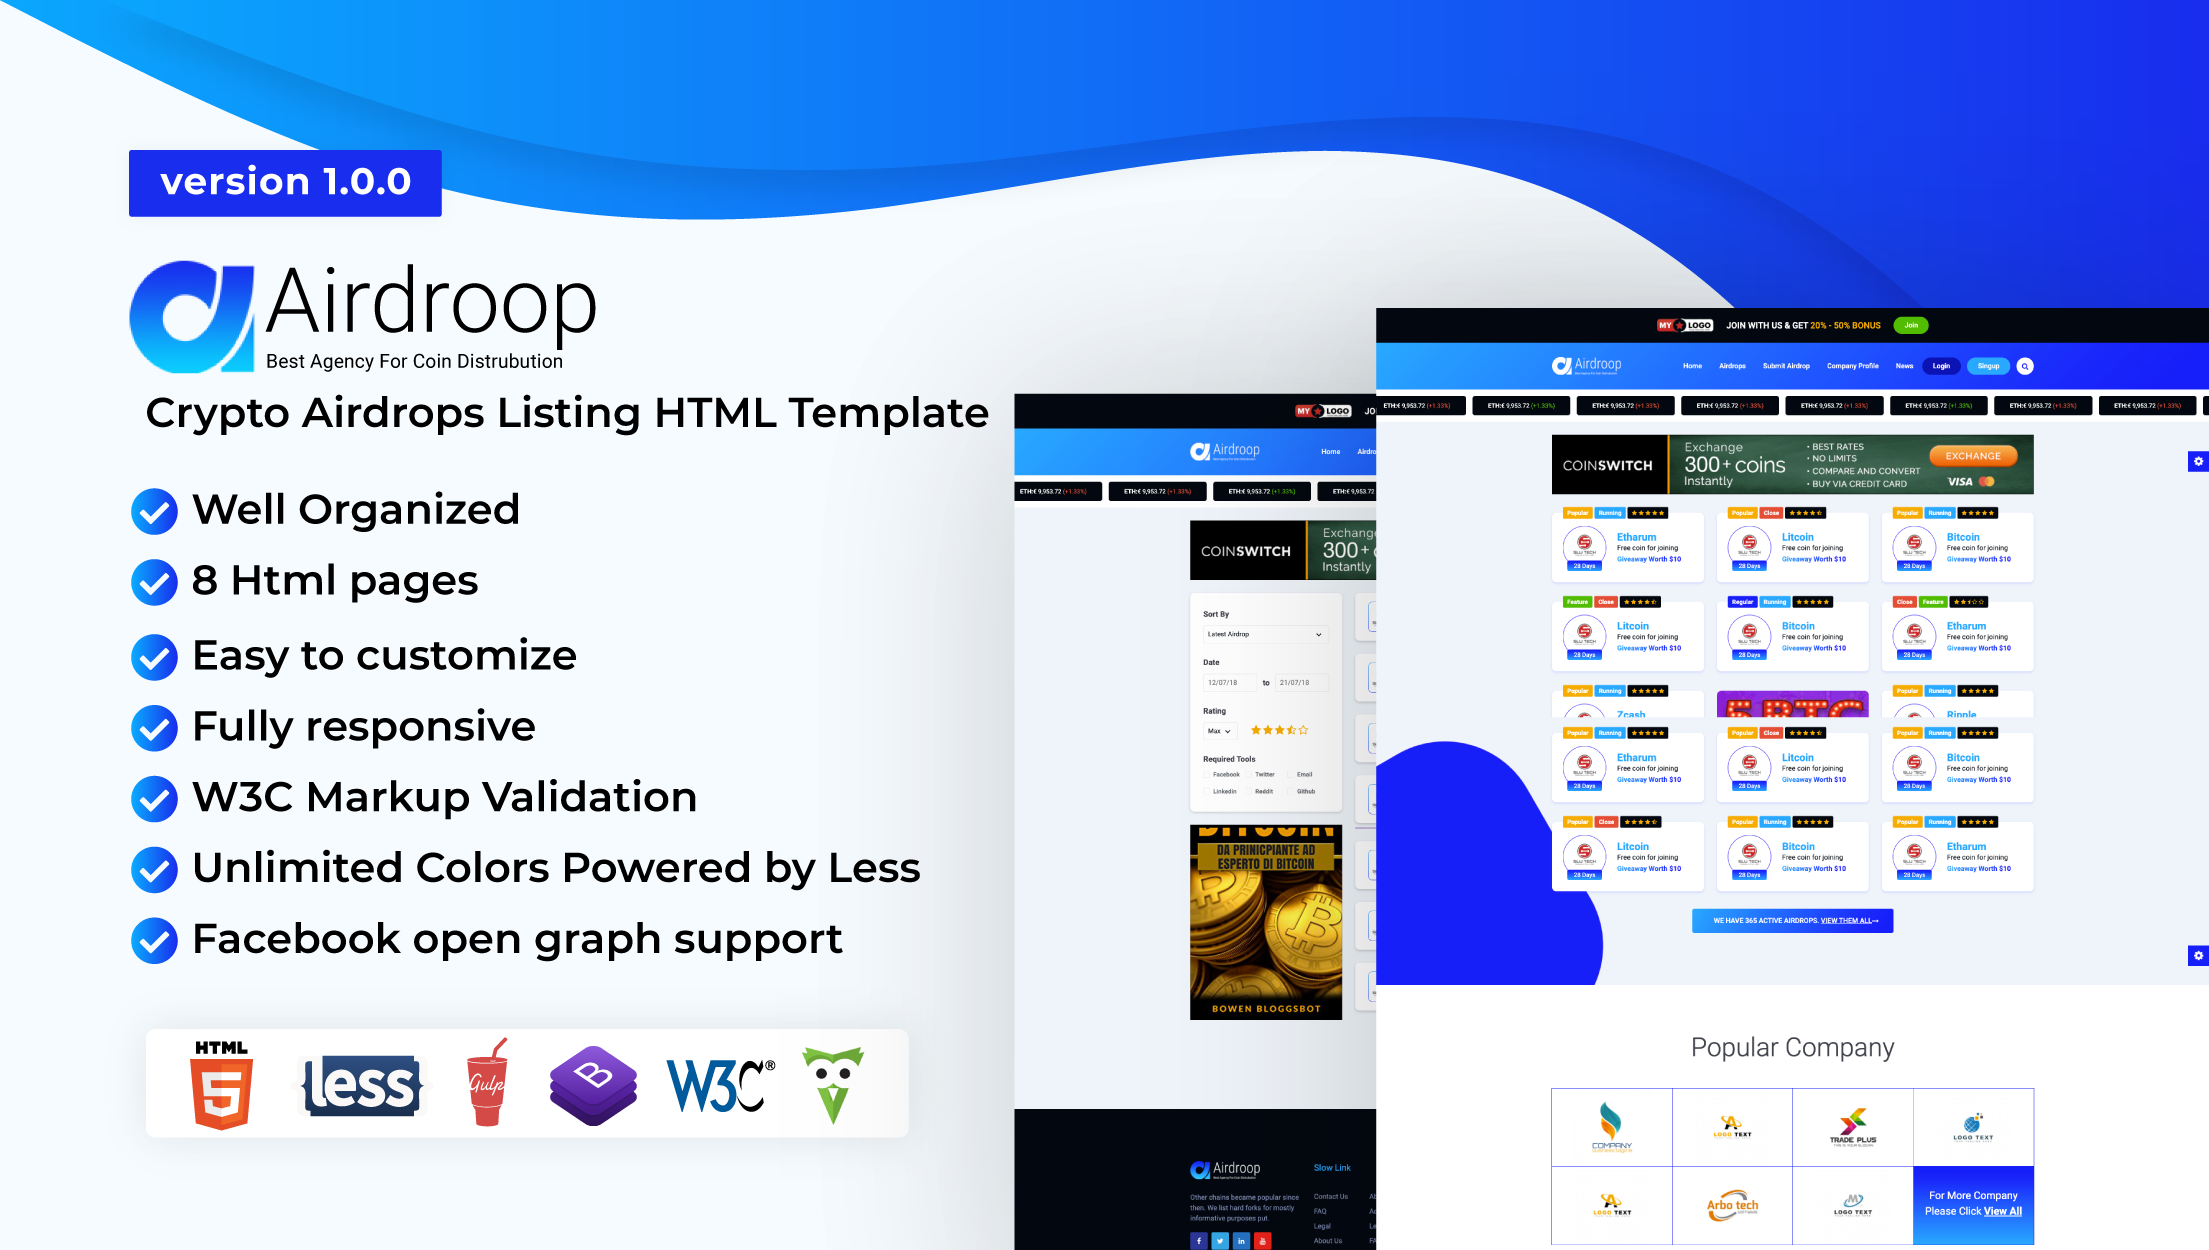 What Airdroop - Crypto Airdrops Listing Html Template